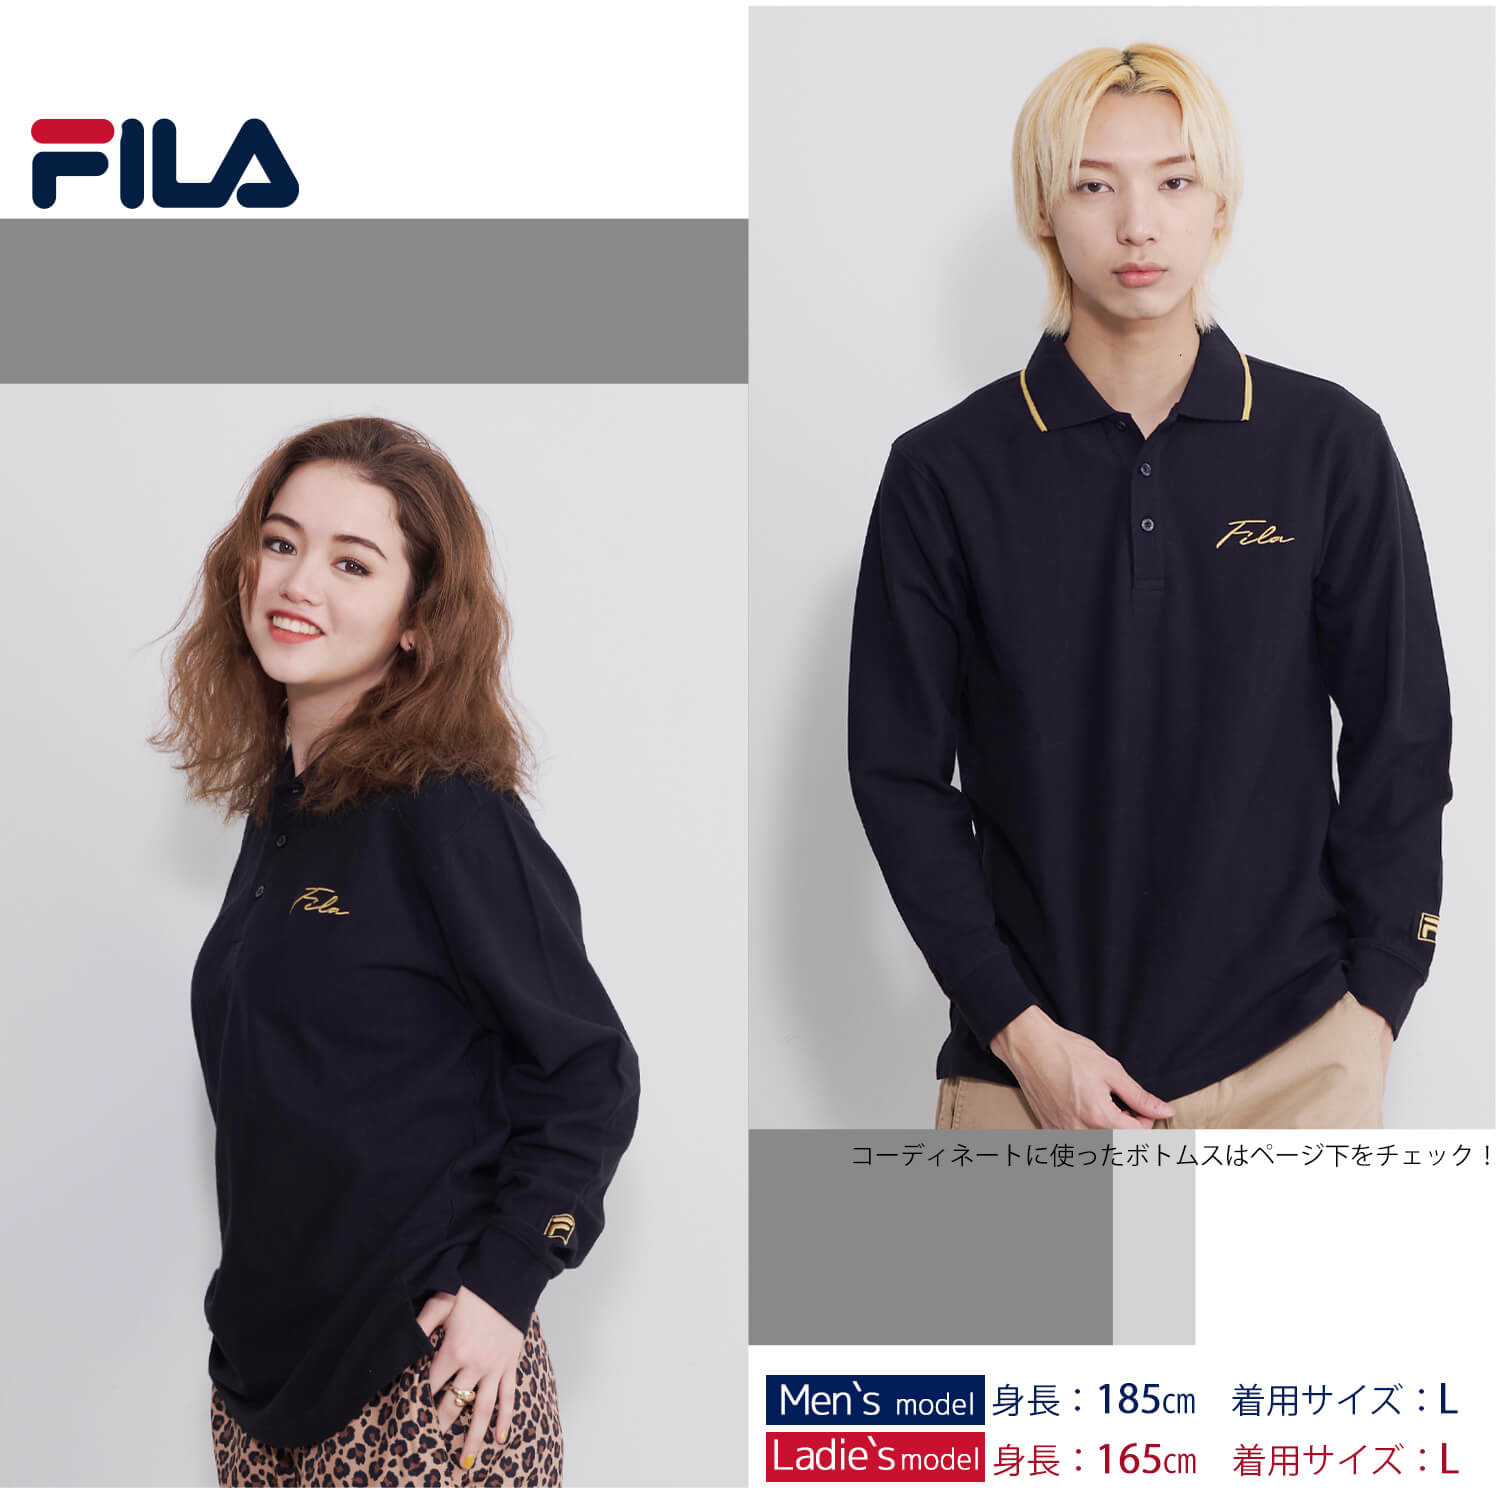 FILA フィラ ポロシャツ 長袖 メンズ 綿 無地 鹿の子 大きいサイズ 4L 5L 筆記体ロゴ 刺繍 衿ライン karlas｜outfit-style｜02